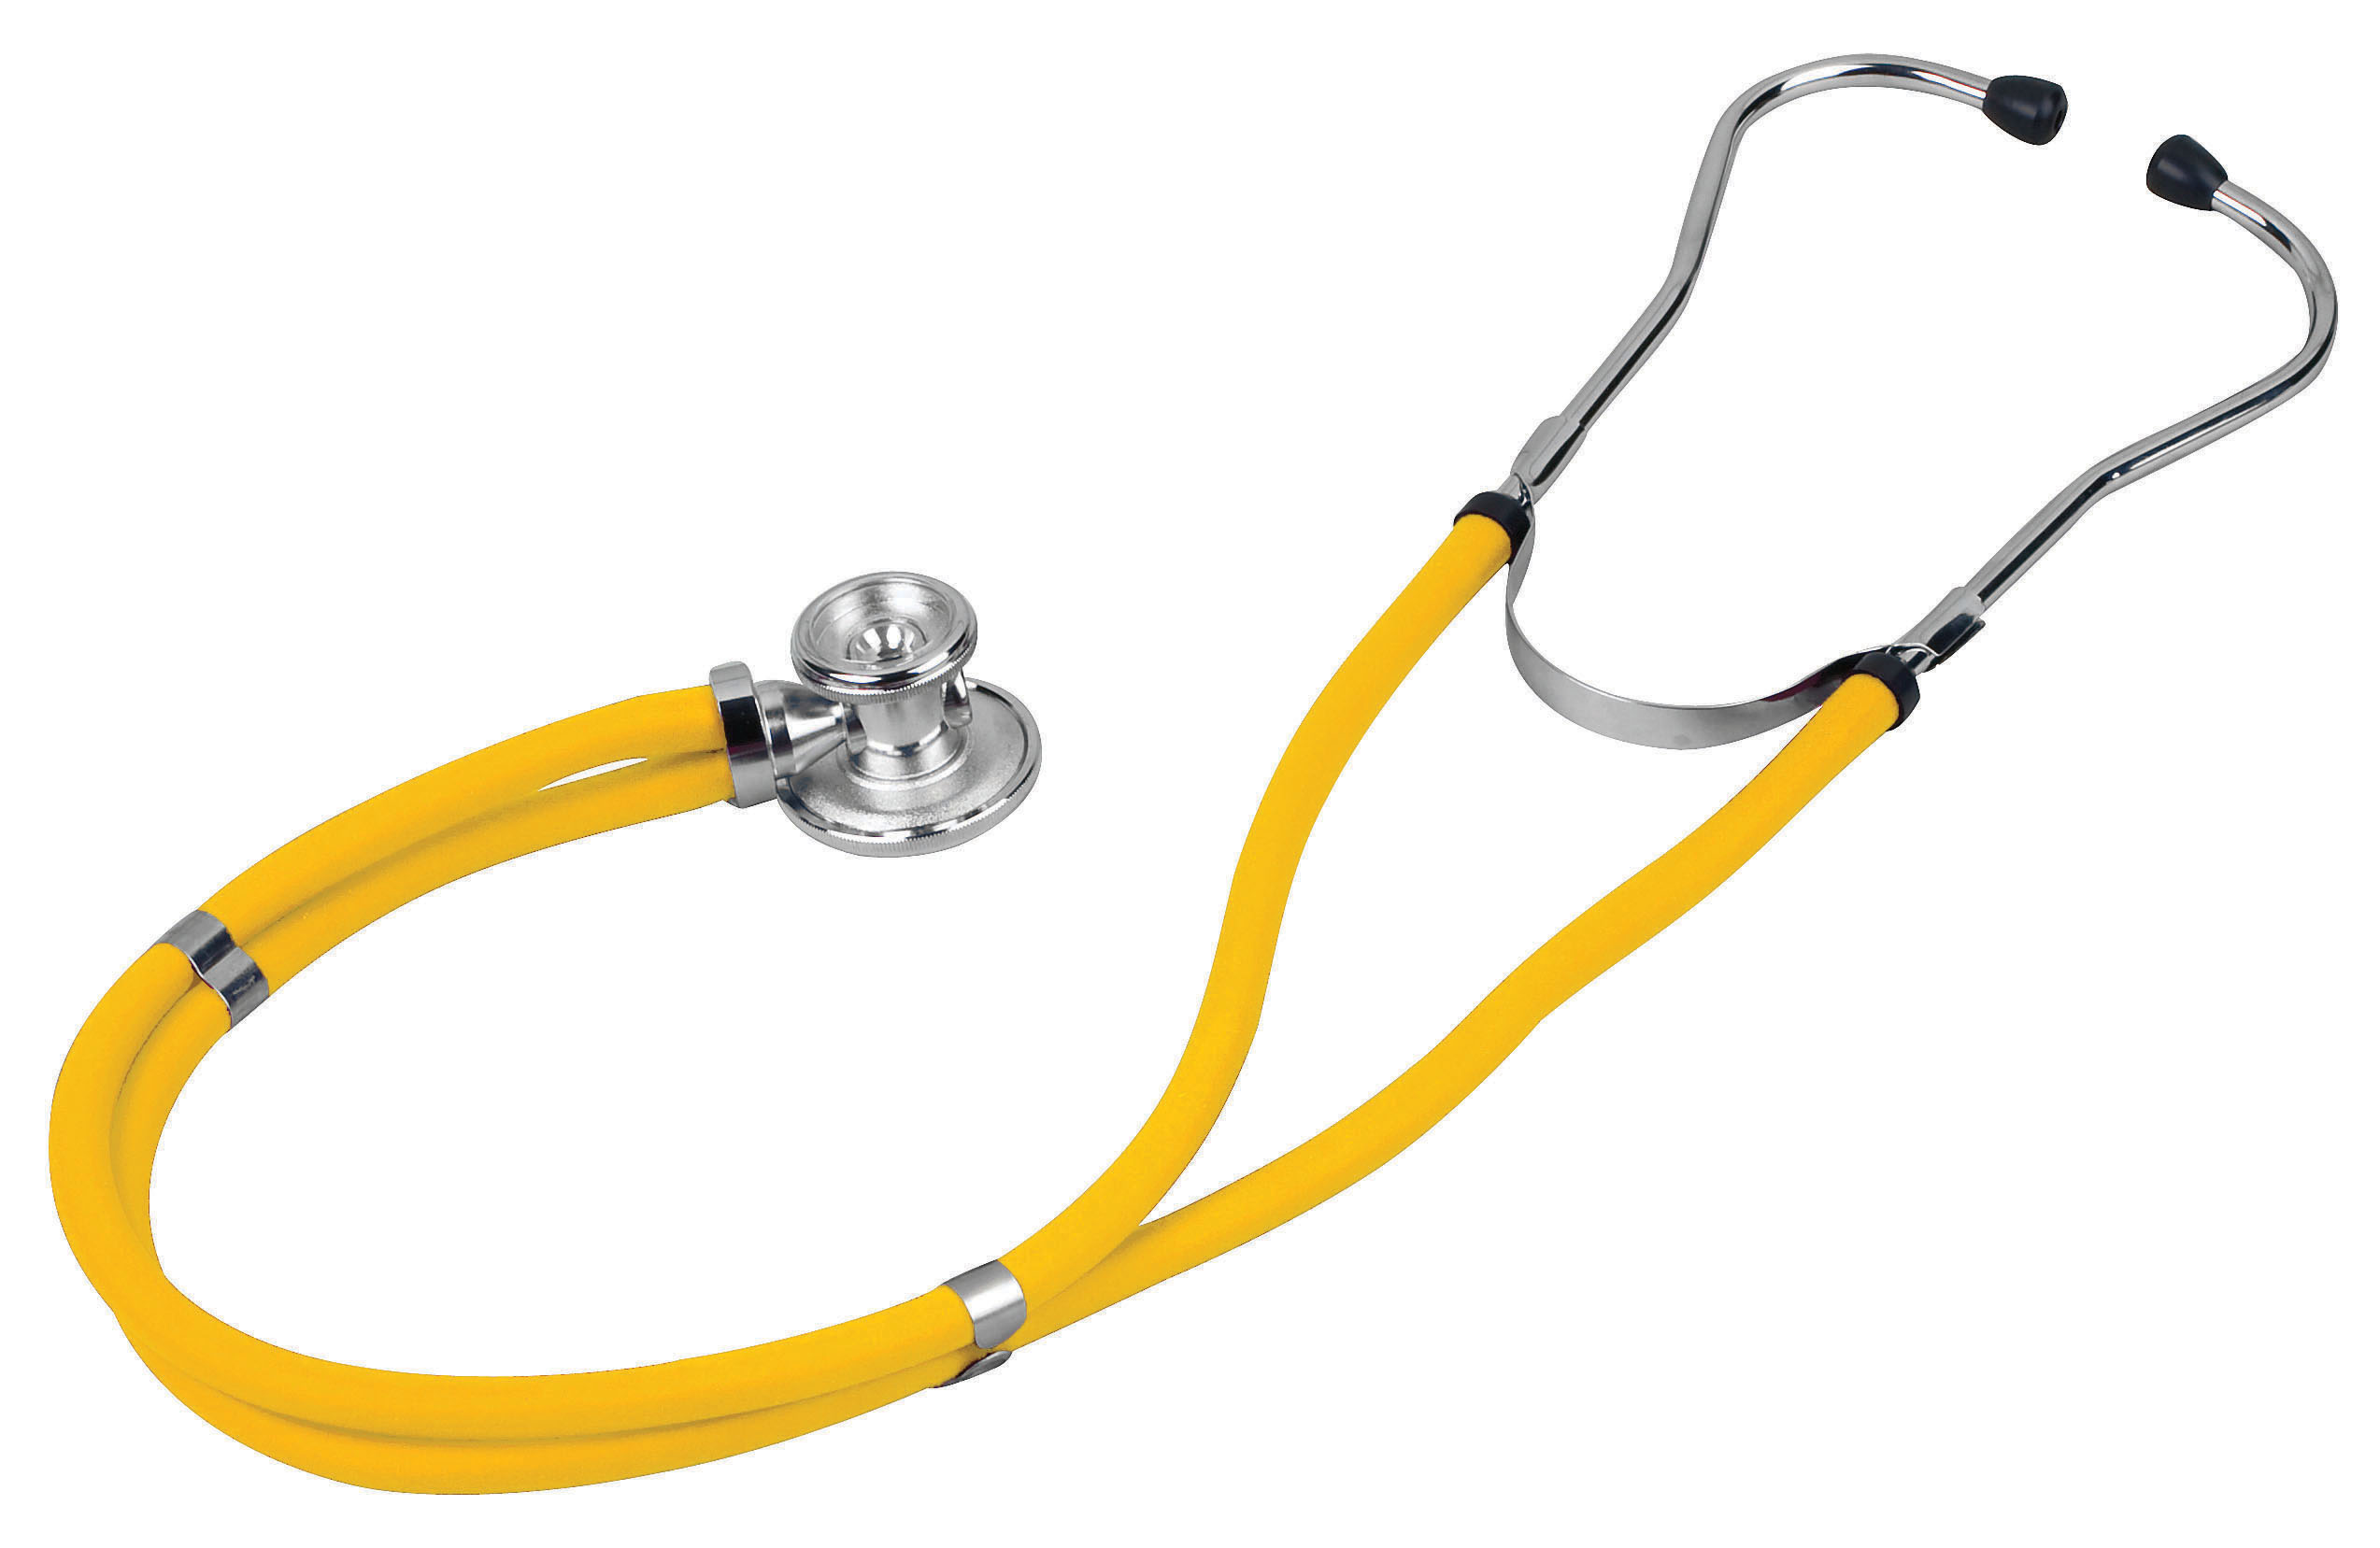 sterling-series-sprague-rappaport-type-stethoscope-yellow-boxed-05-11014-veridian-3.jpg